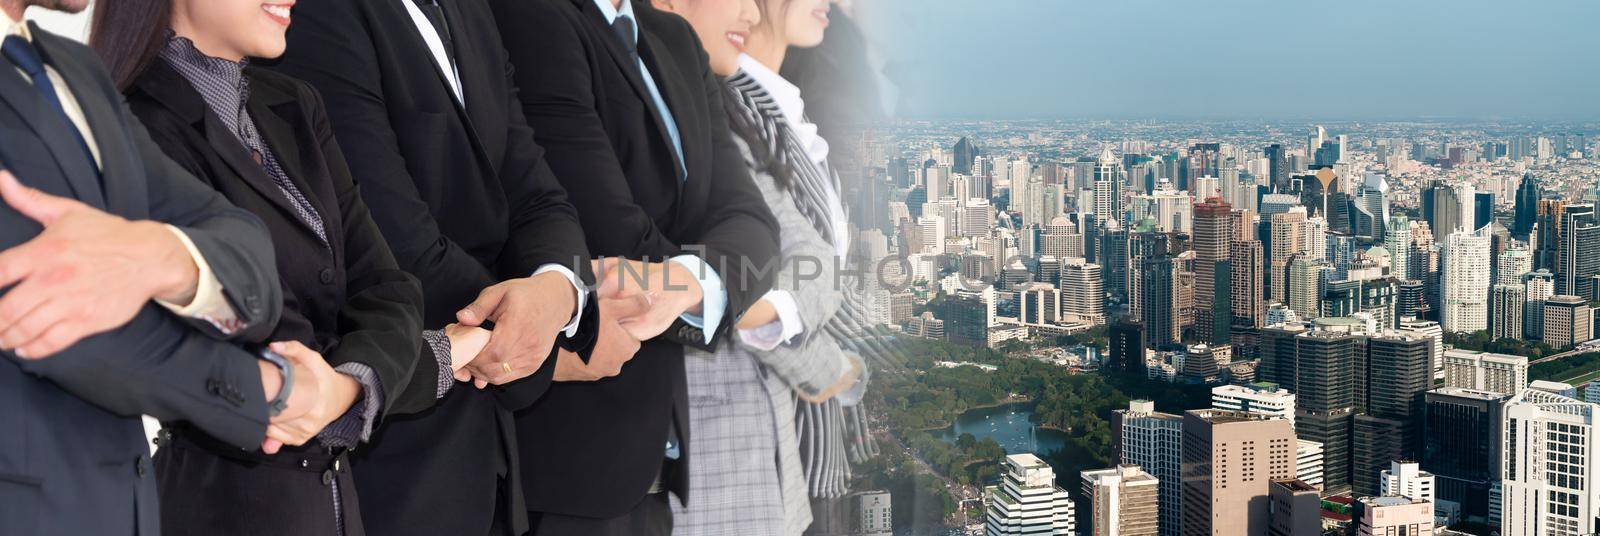 Successful business people standing together broaden view by biancoblue